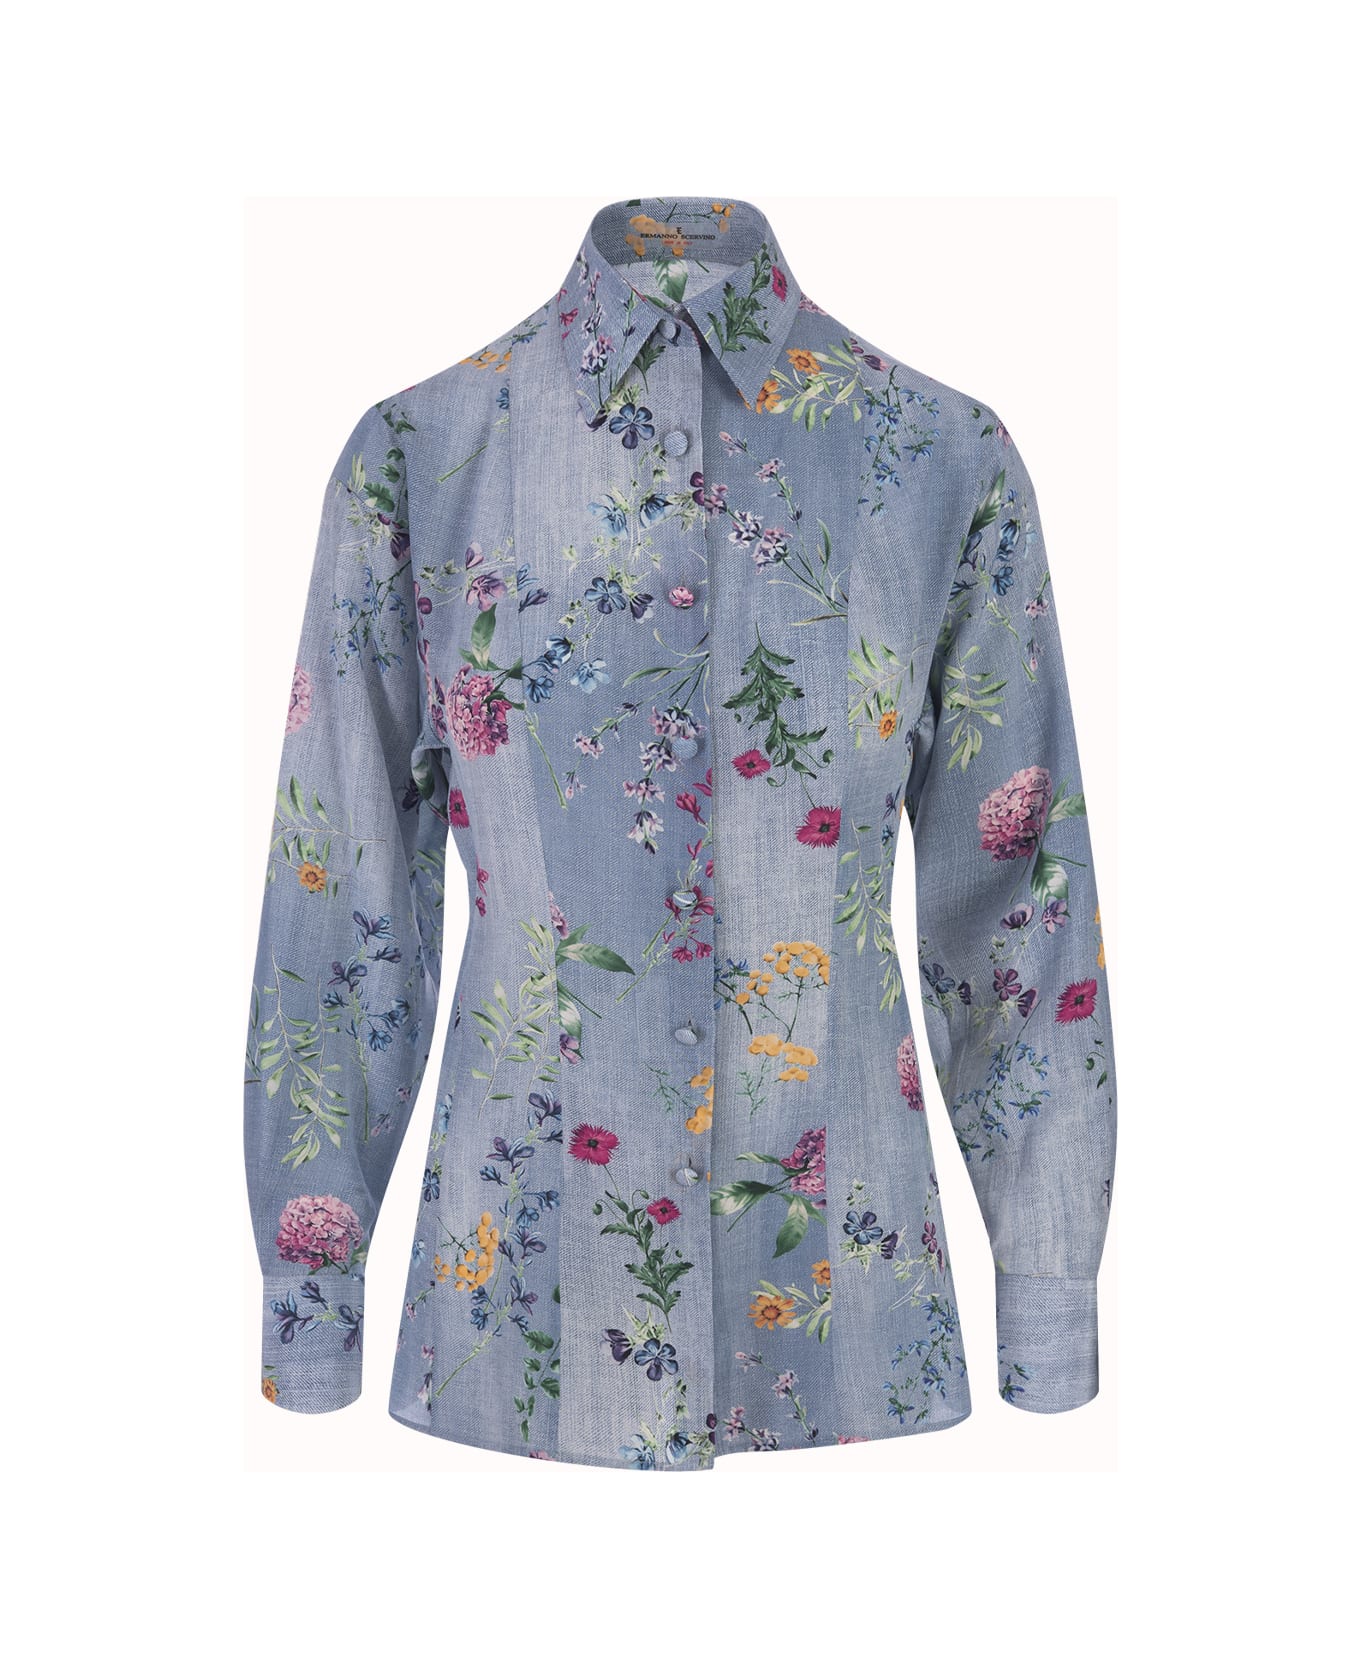 Ermanno Scervino Silk Shirt With Floral Print - Blue